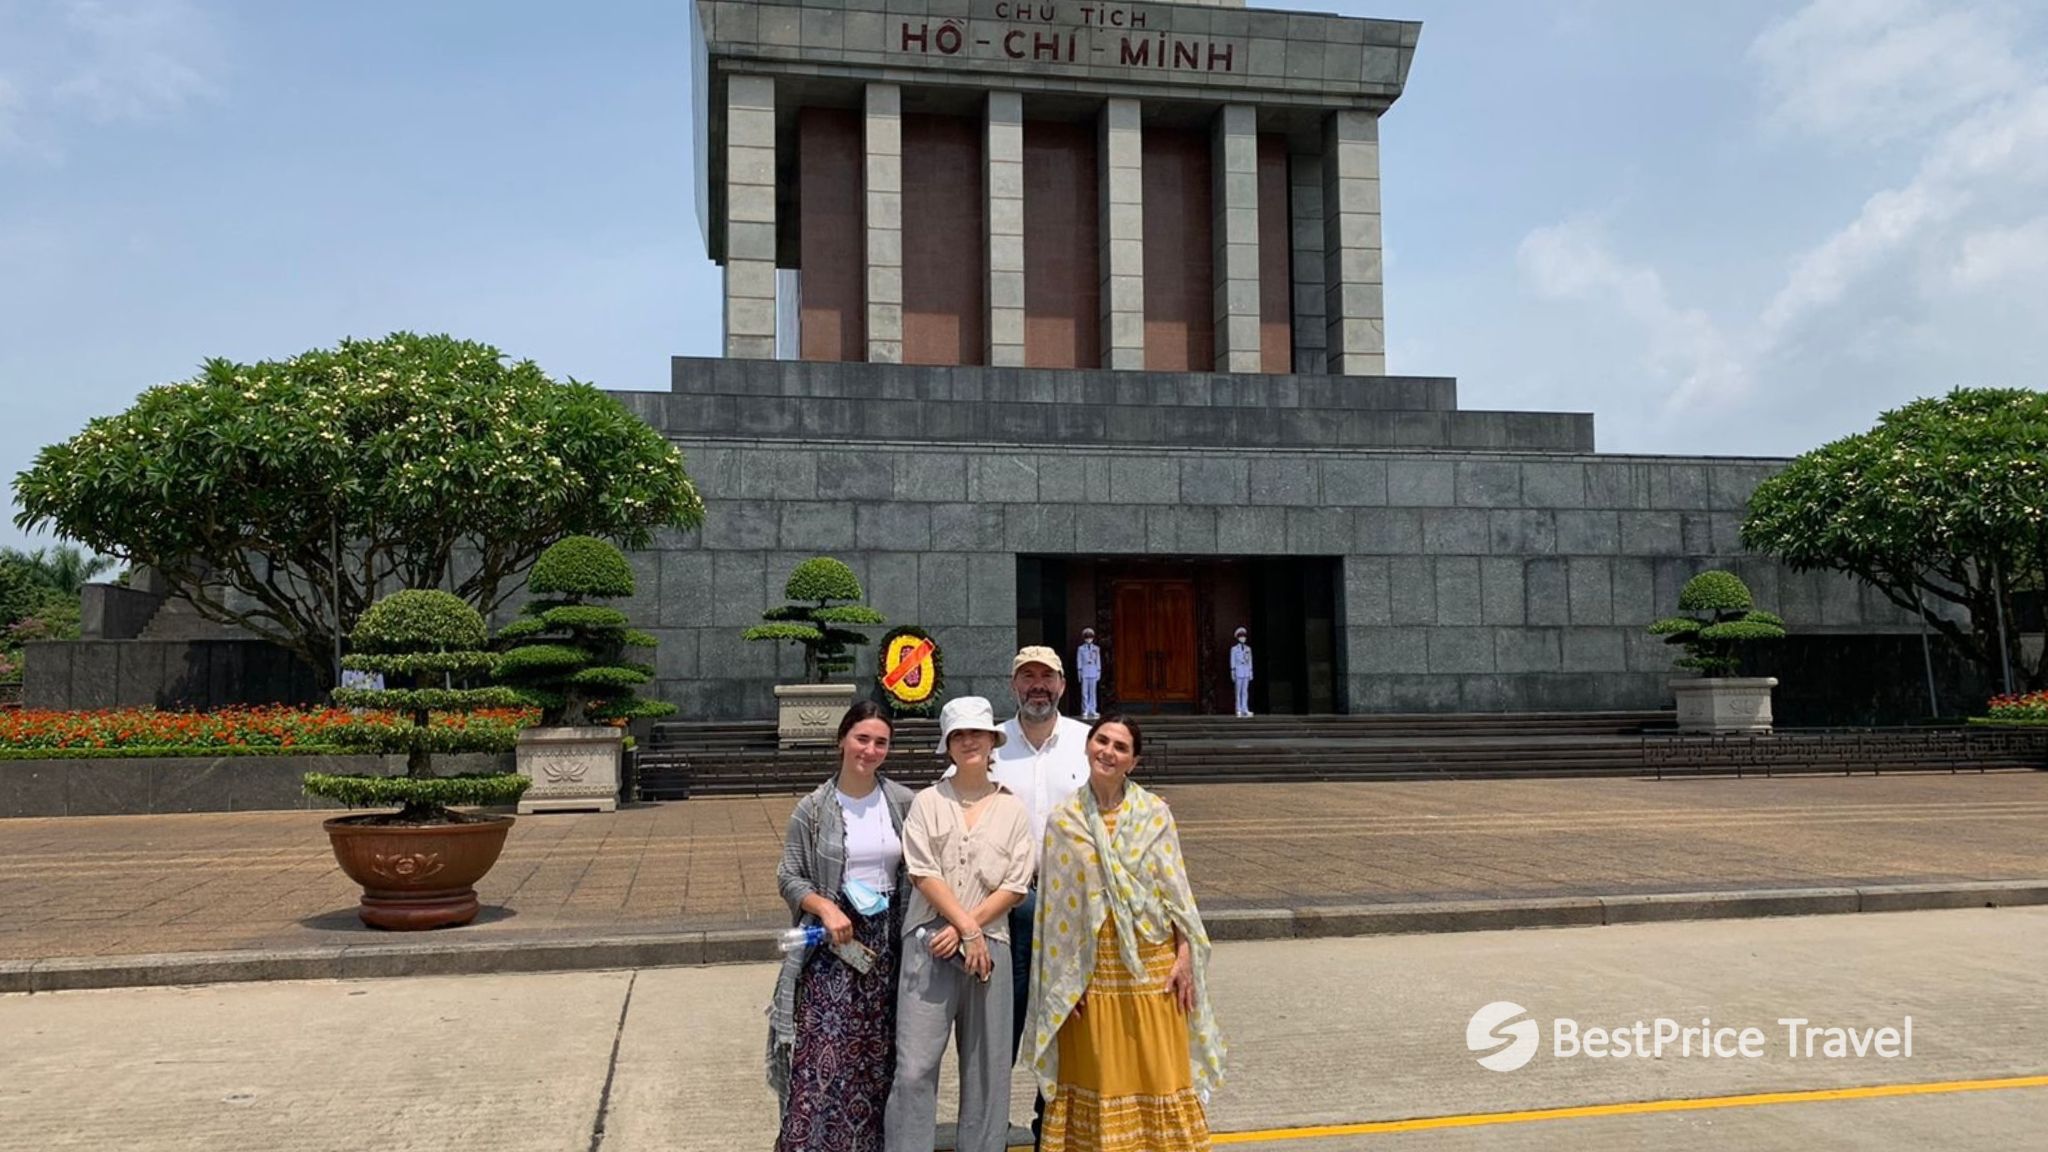 Day 2 Pass By The Famous Mausoleum Of President Ho Chi Minh